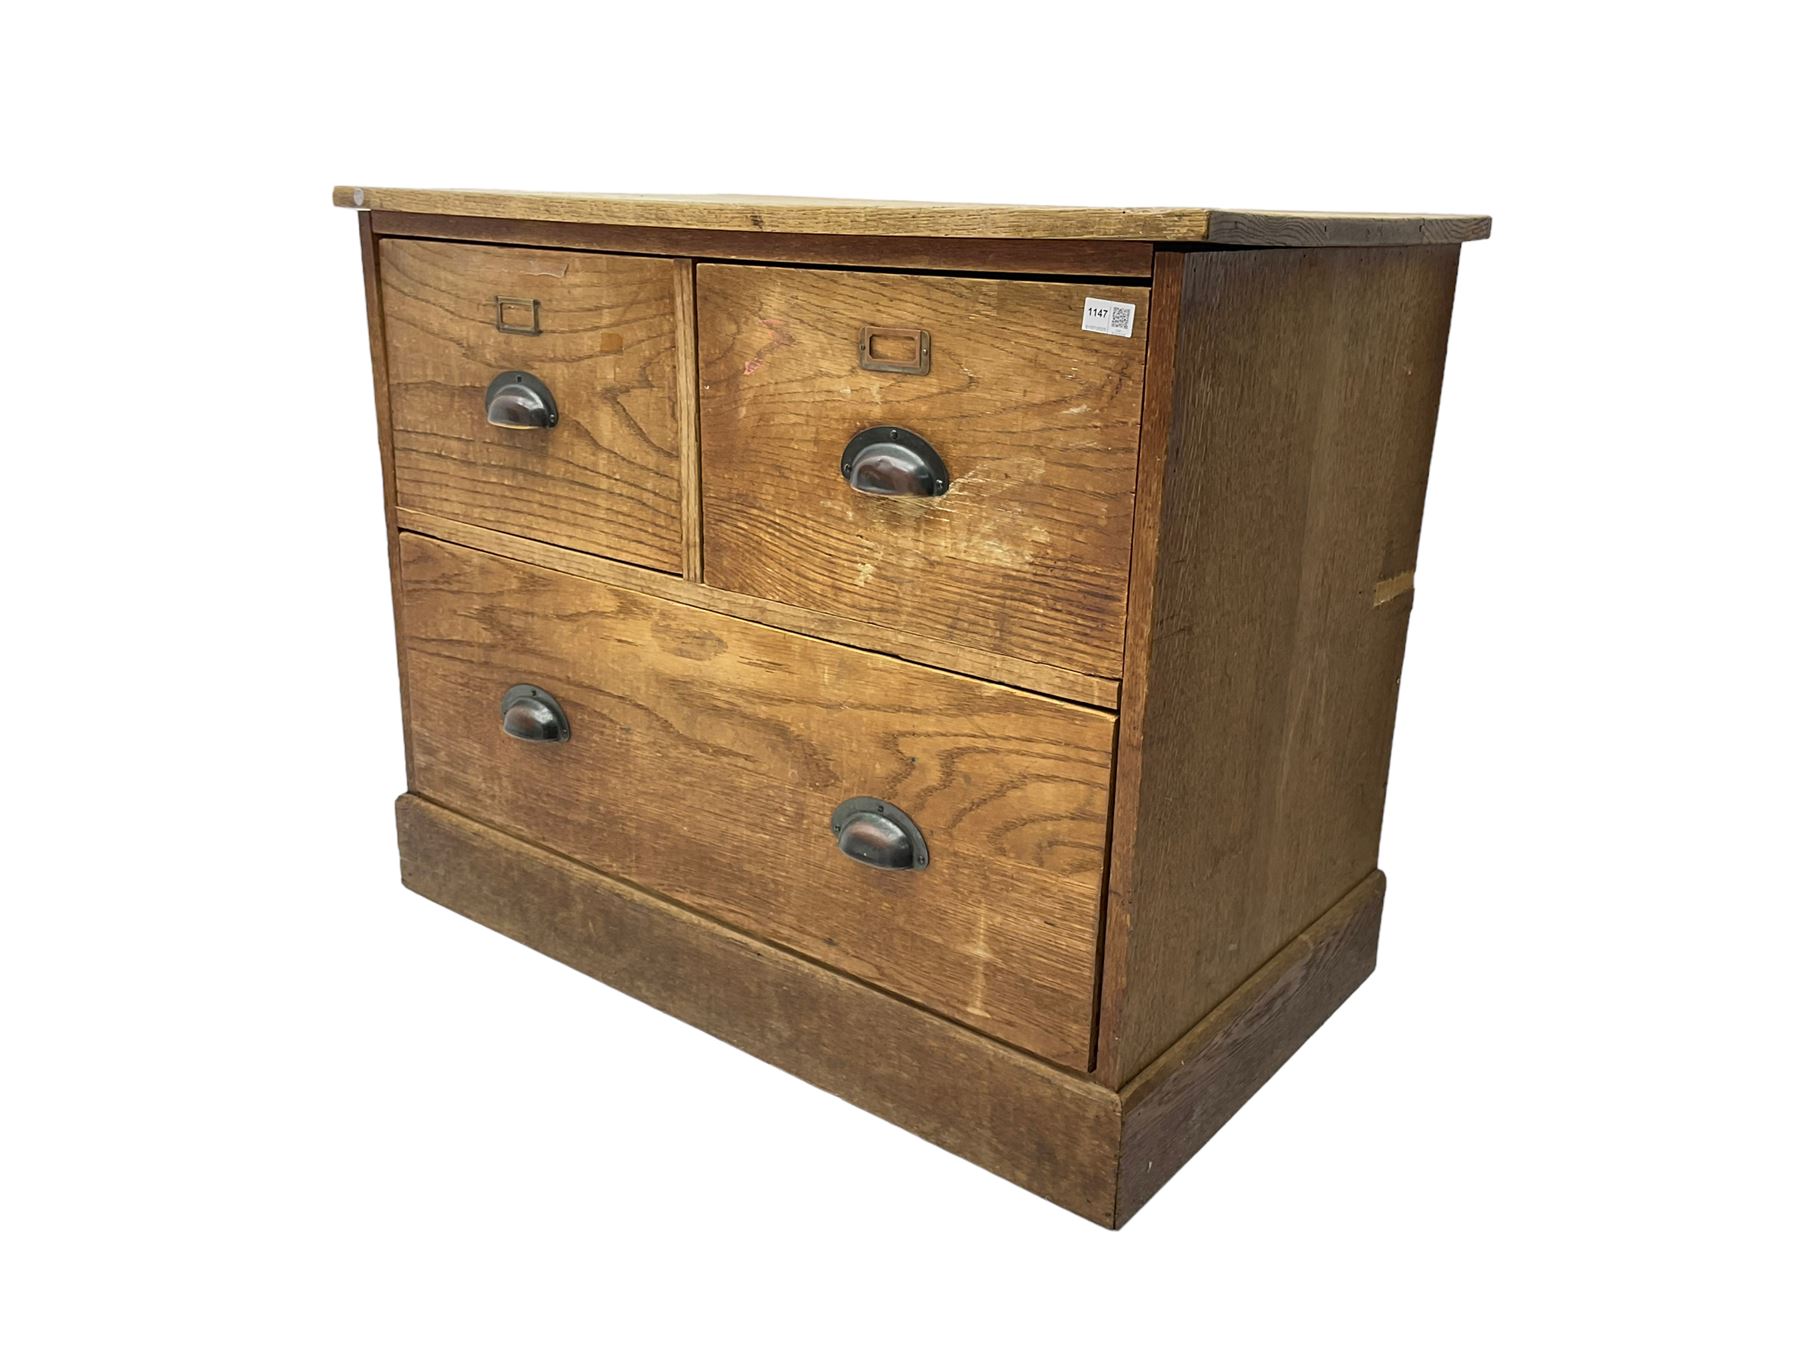 Early to mid-20th century oak chest - Image 5 of 6